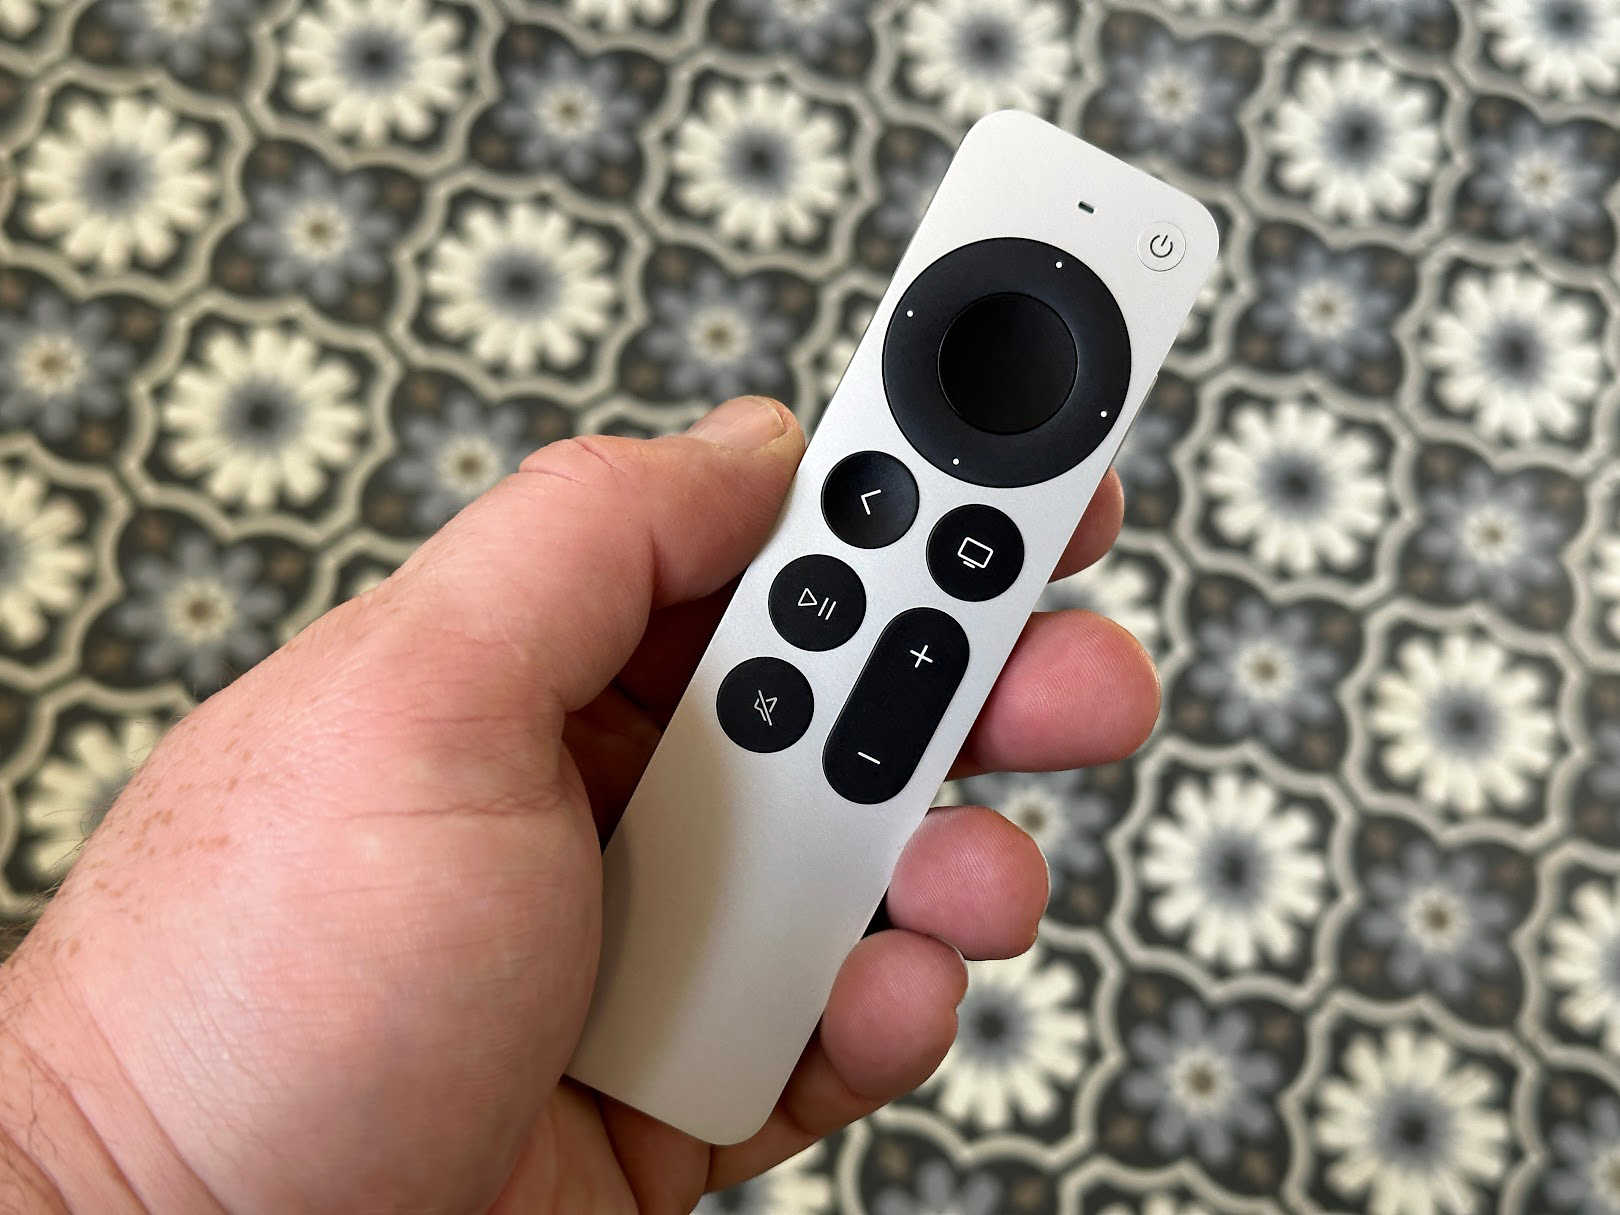 s best remote isn't in the box for some reason